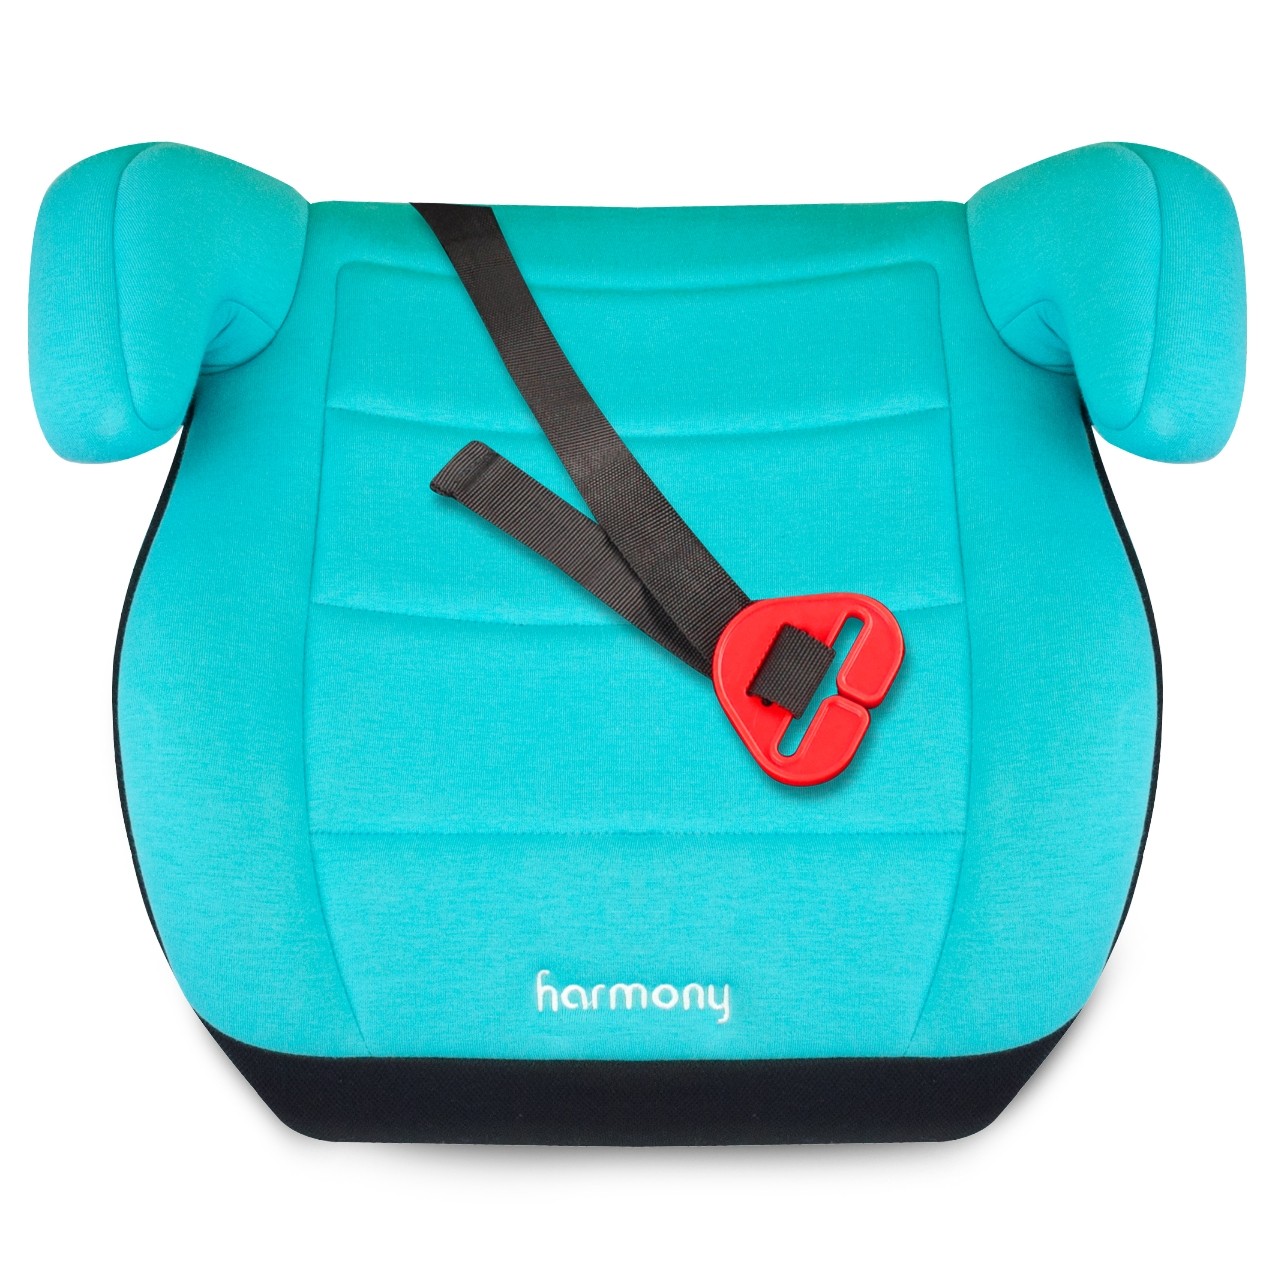 Youth Booster Car Seat - Teal